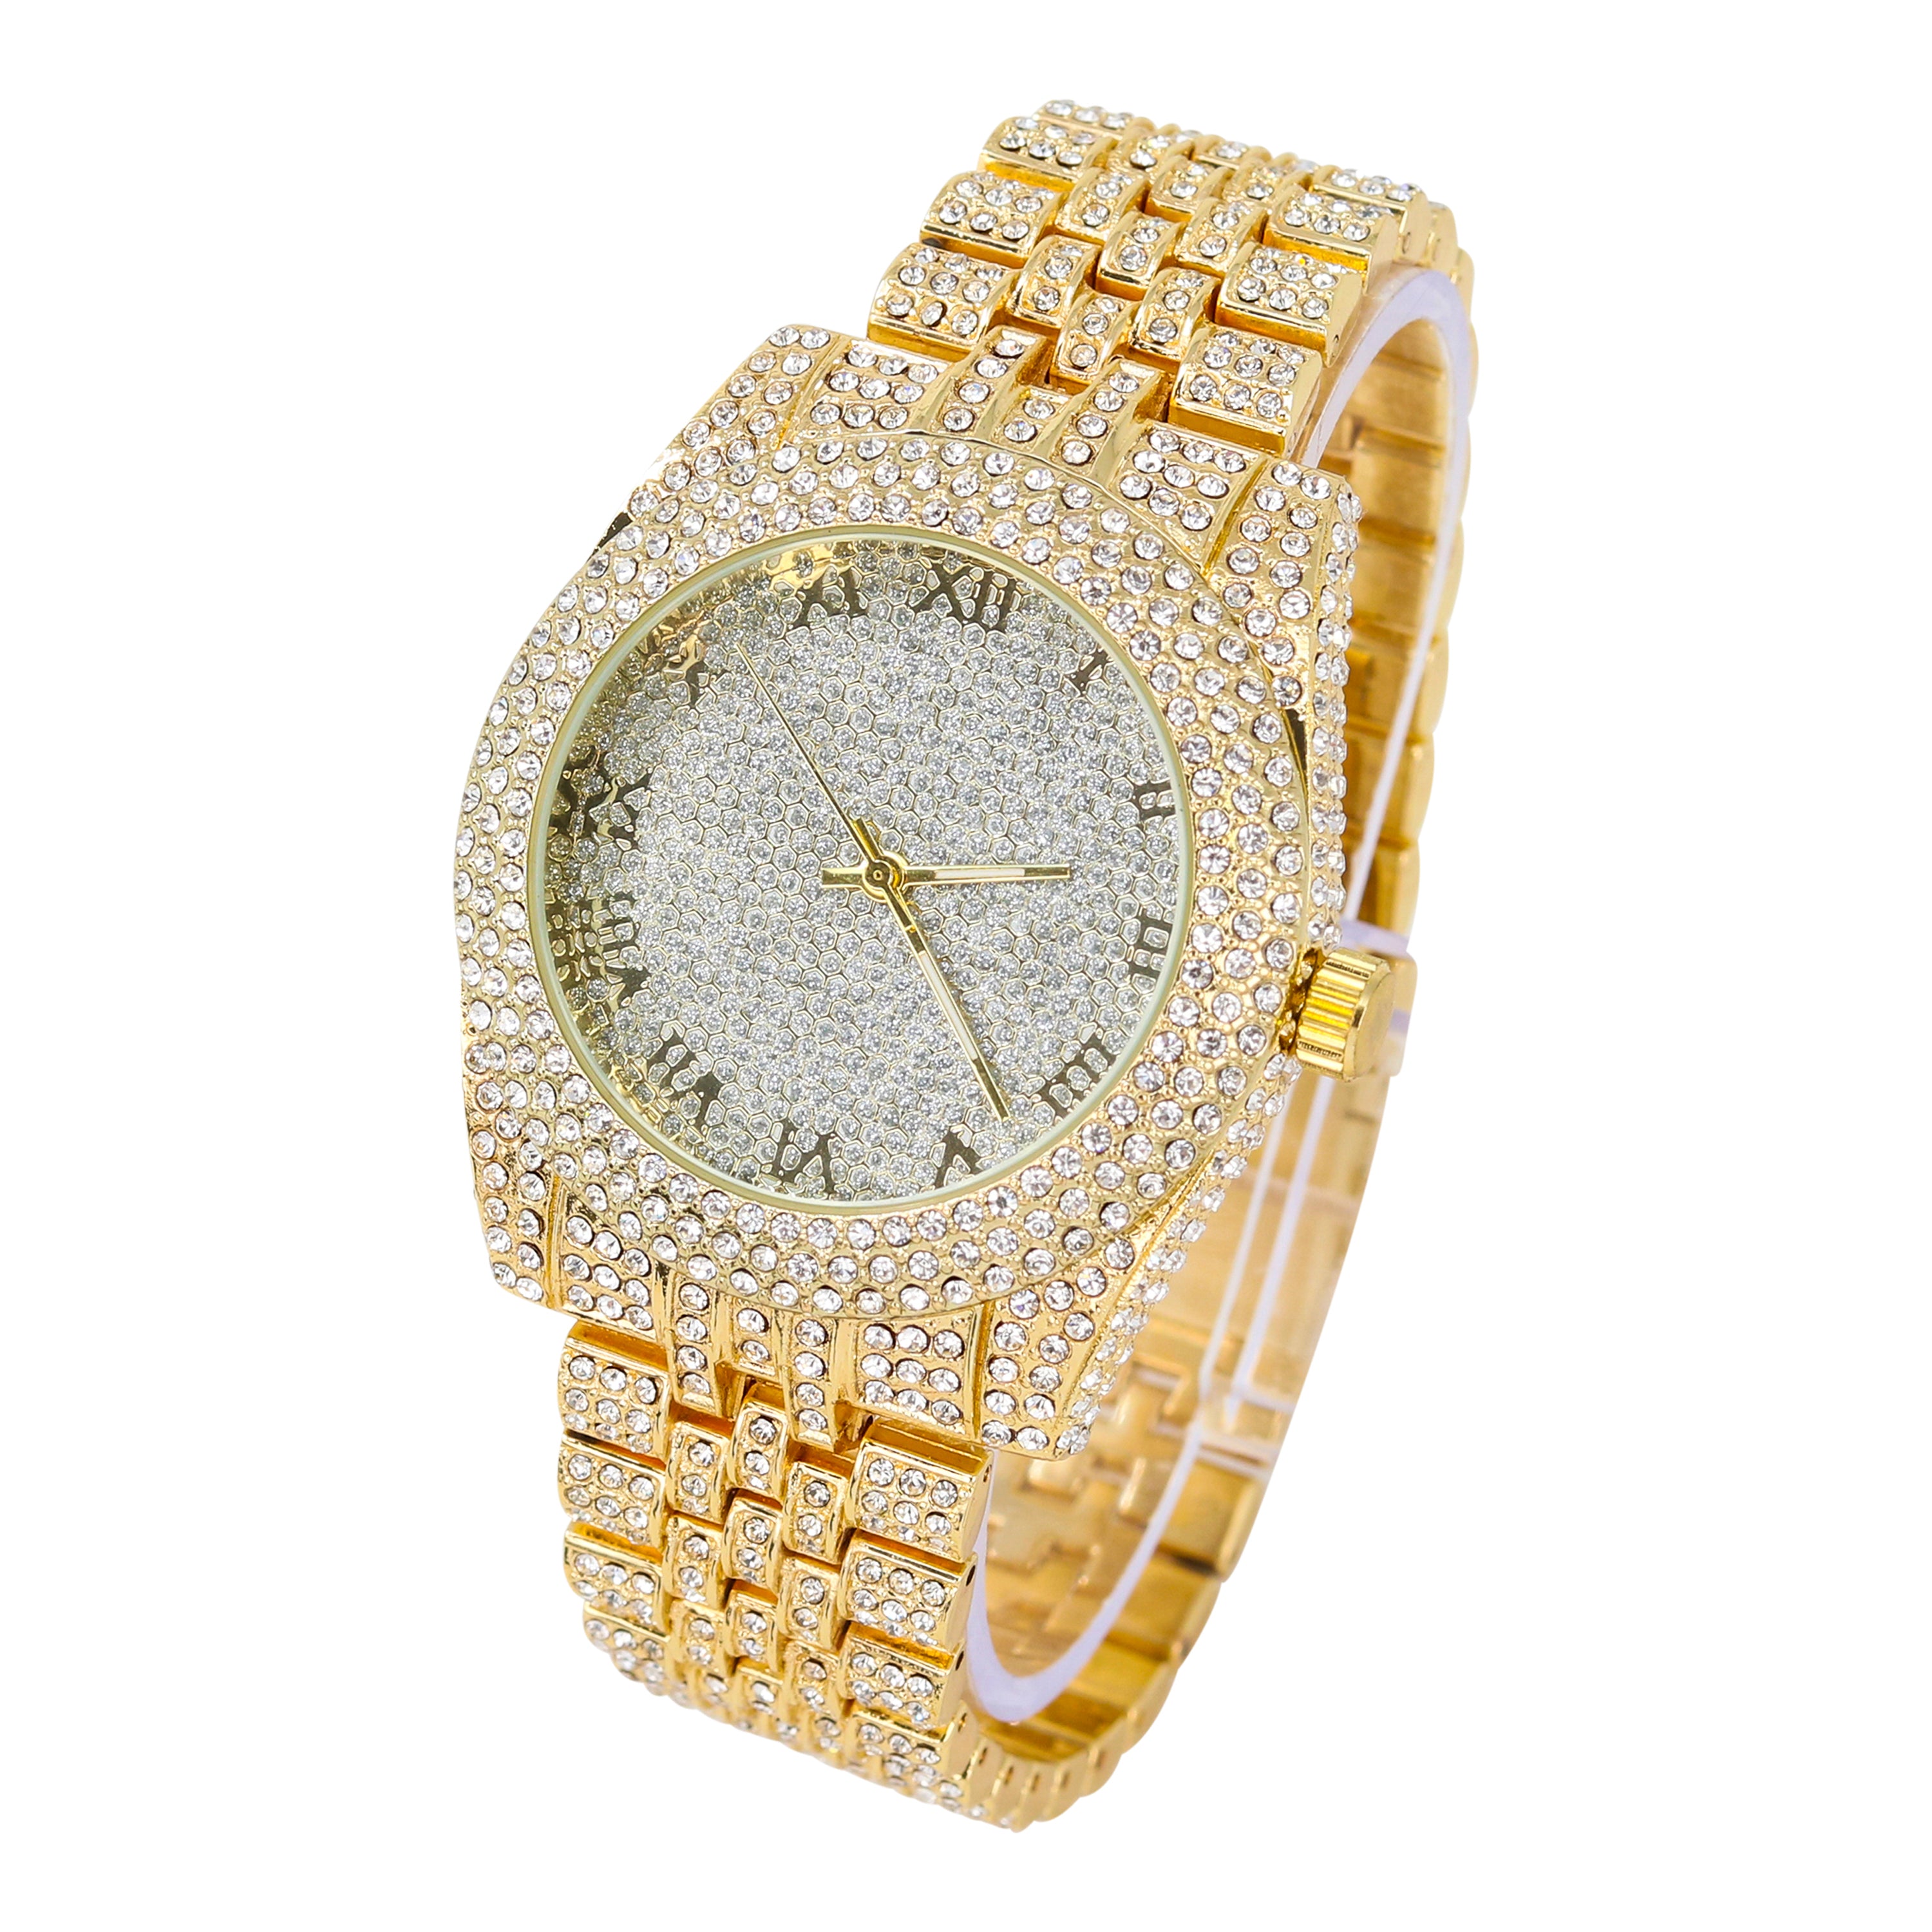 Men's Round Iced Out Watch 43mm Gold - Roman Dial